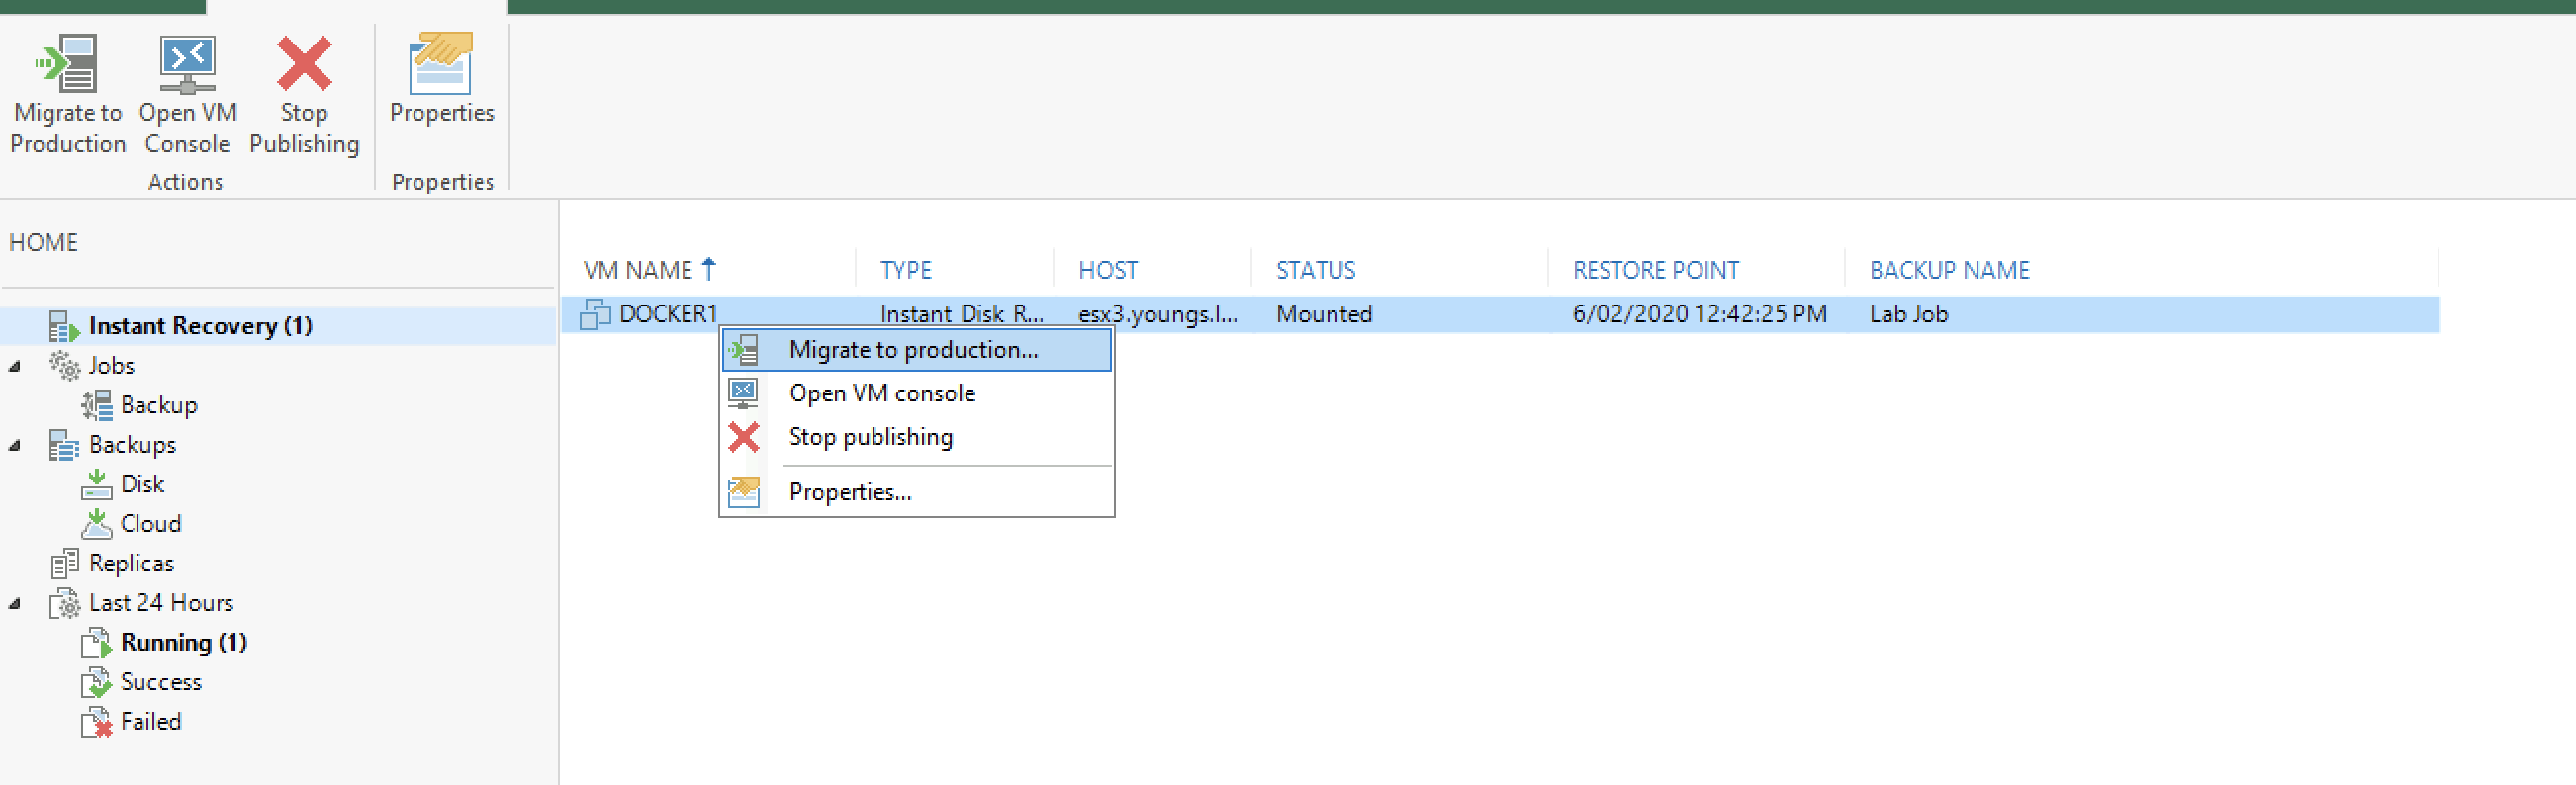 Instant Disk Recovery in Veeam v10